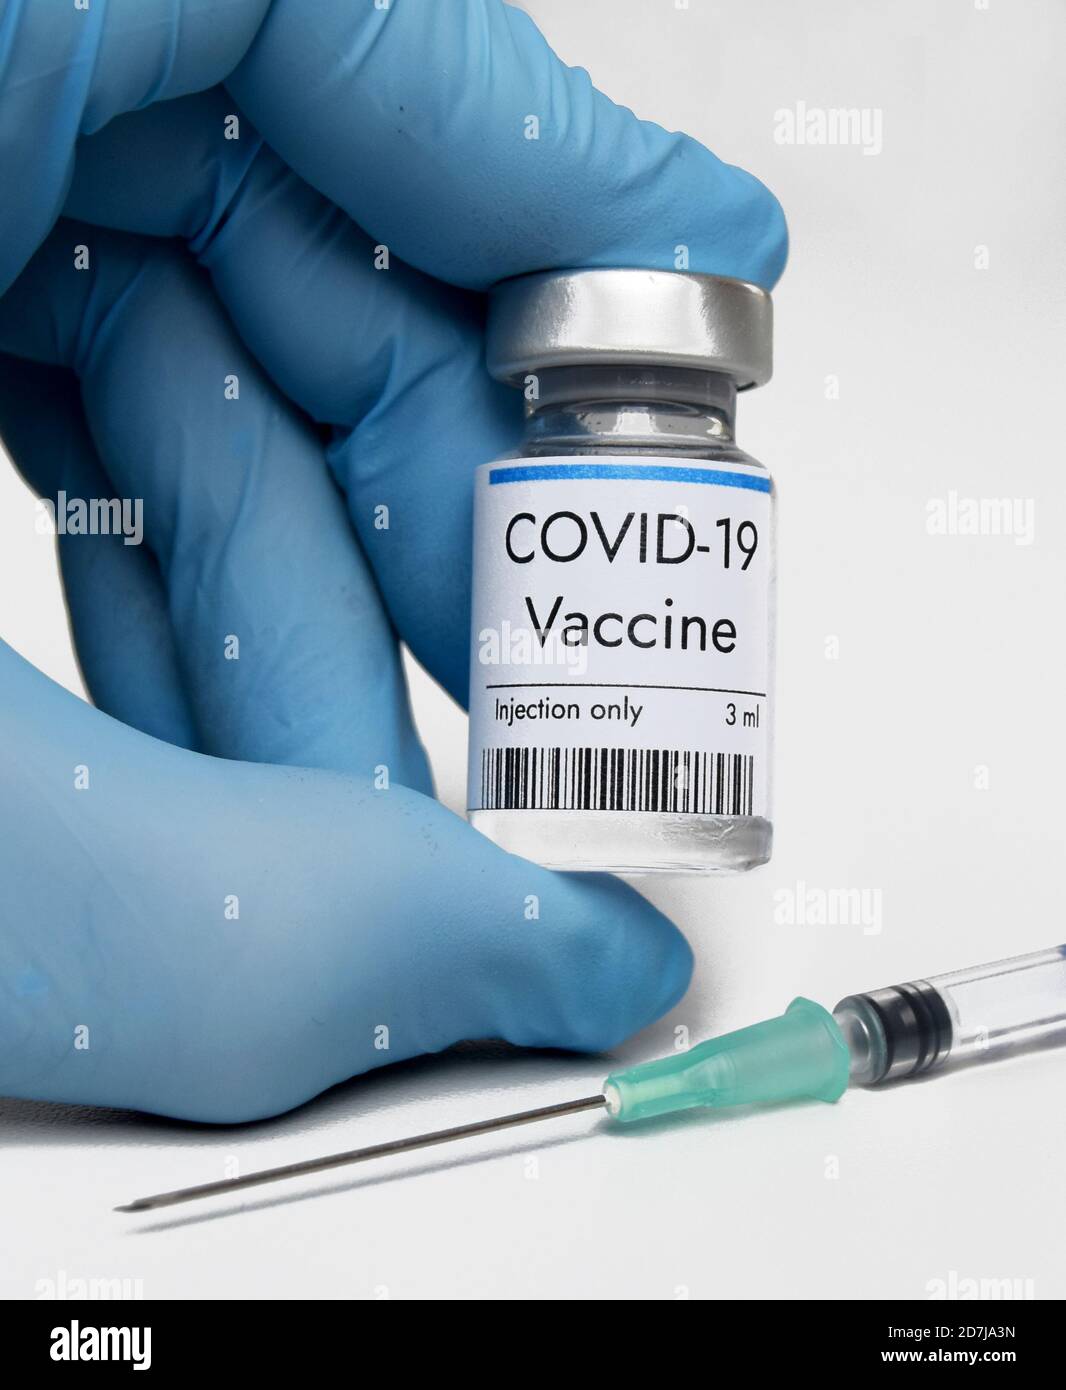 Vaccine against coronavirus in phial at third trial phase at Moderna medical laboratory in USA. COVID-19 vaccine. Healthcare and medical concept. Stock Photo